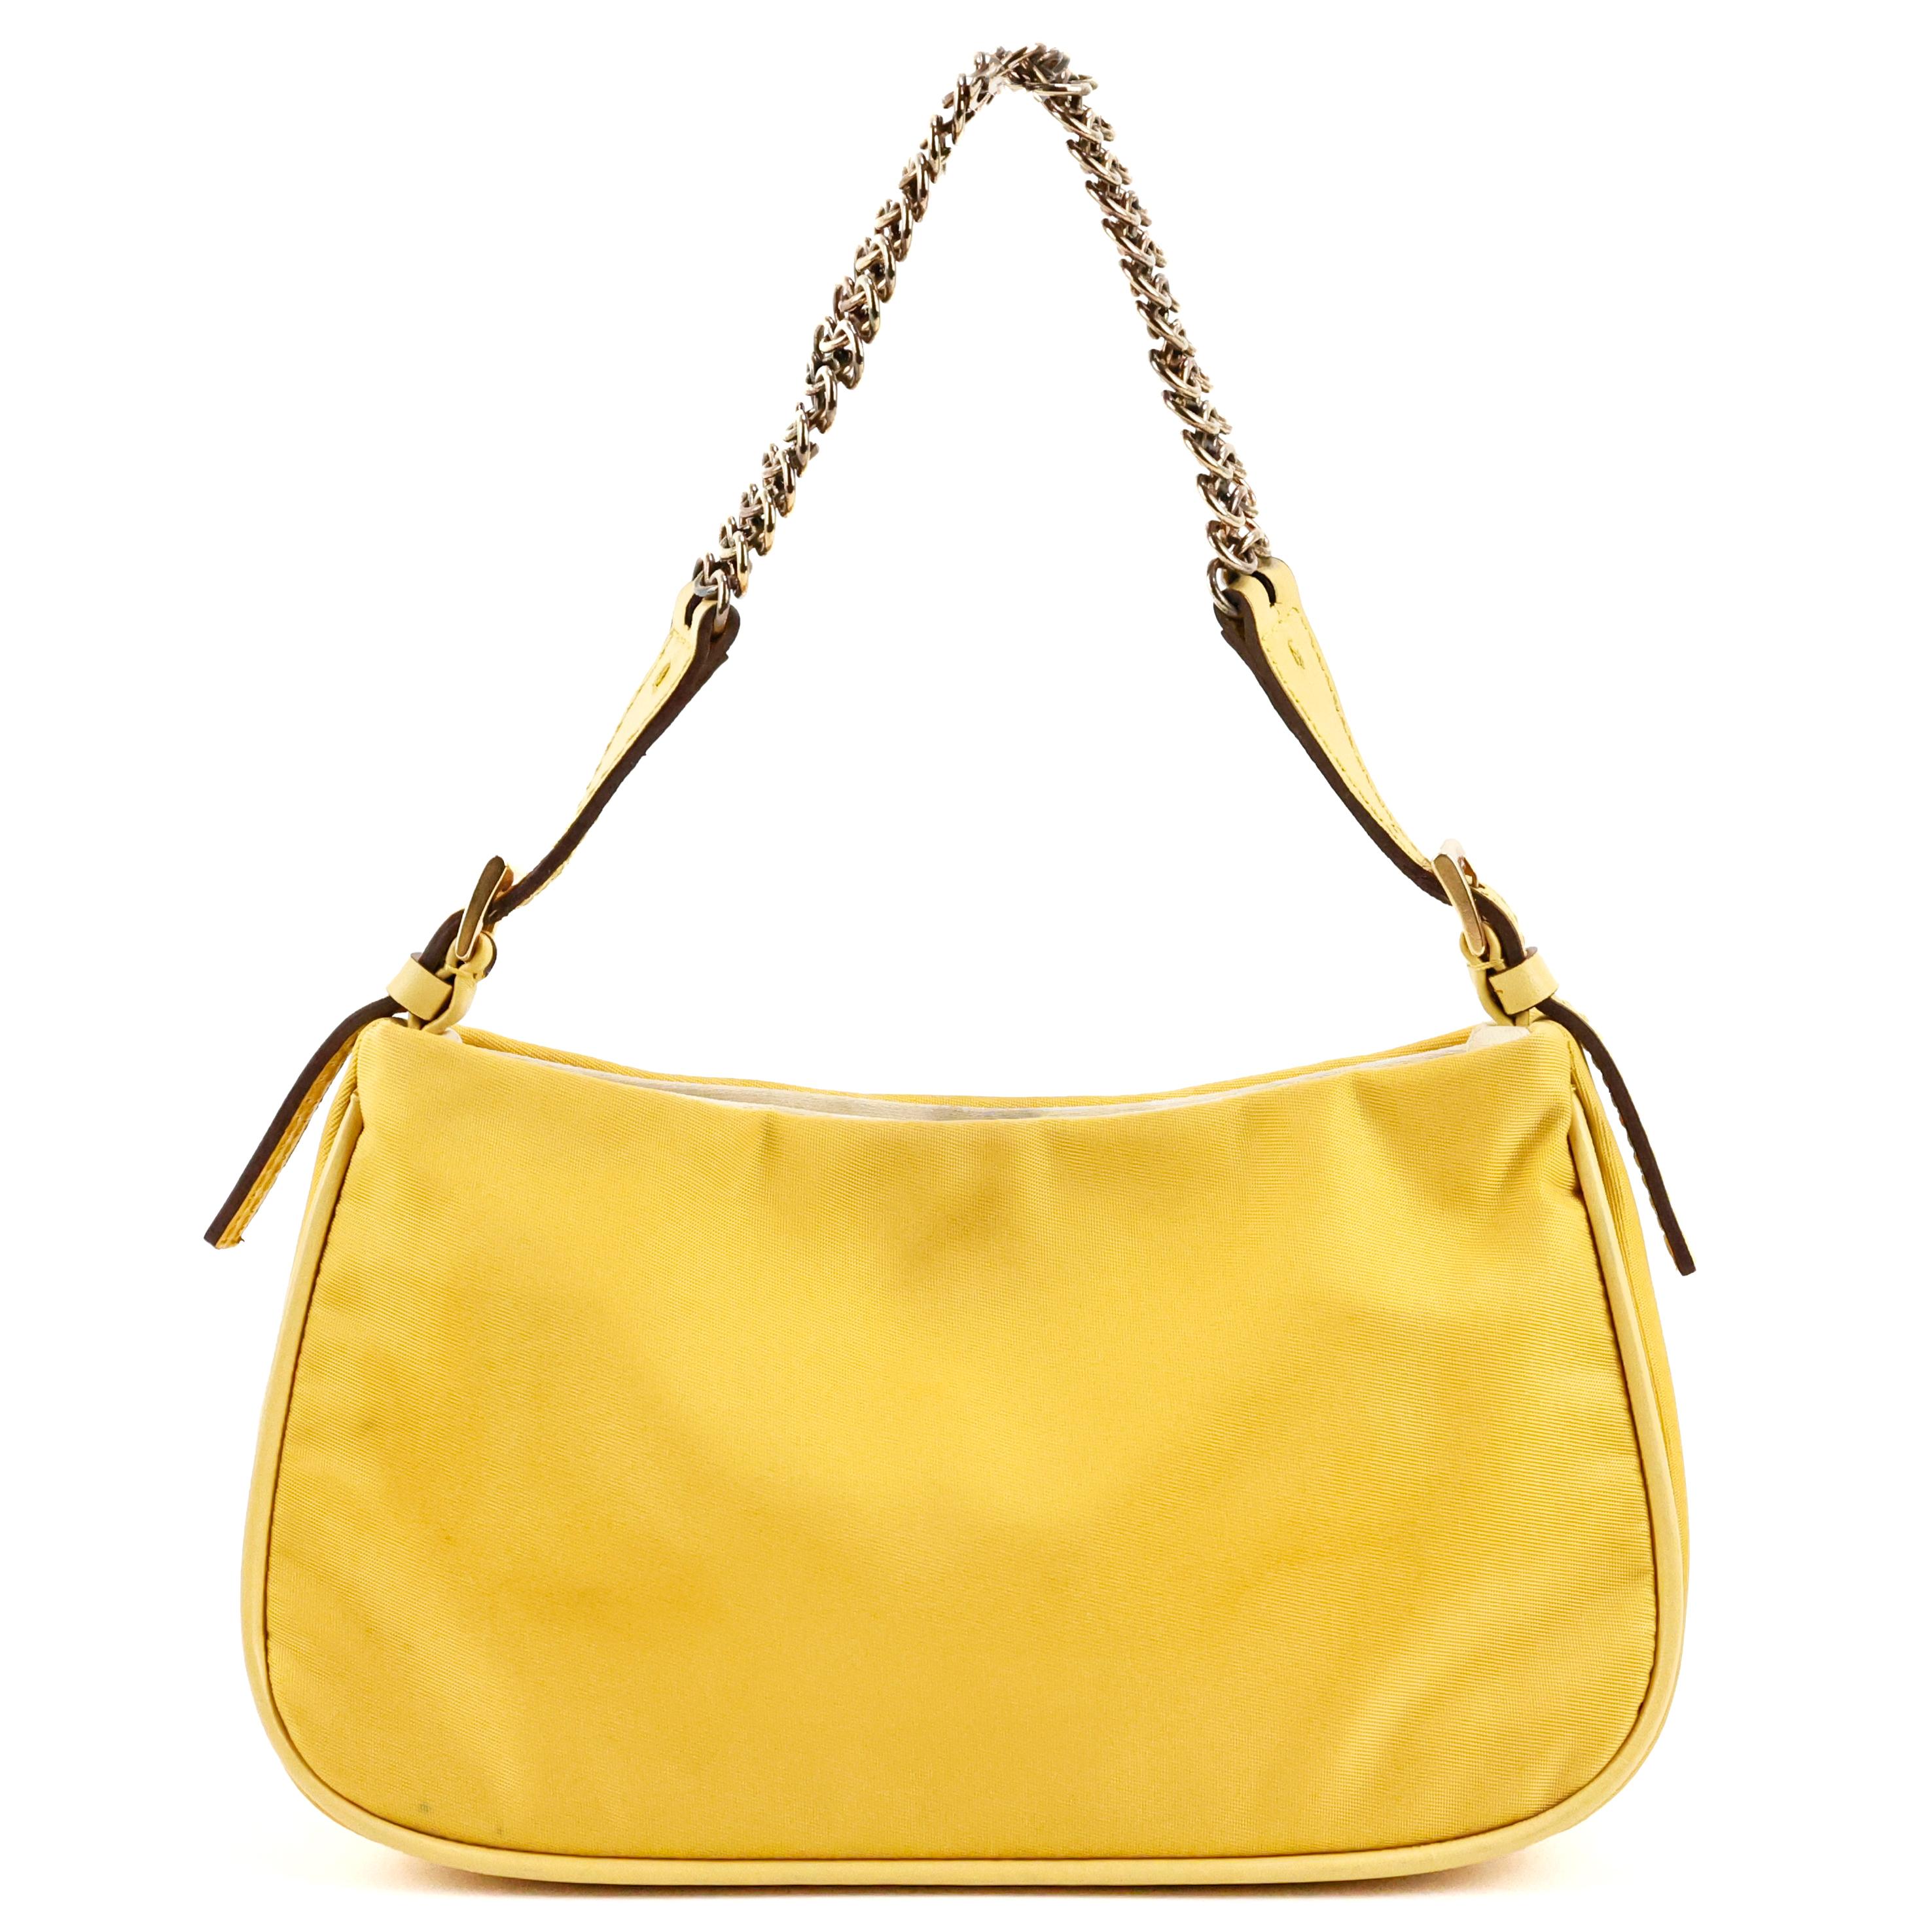 Prada mini Cleo bag in nylon color yellow, linning in silk color champagne, gold hardware. 

Condition:
Good. To note: some discolouration on chain, spot around on the magnetic closure.

Packing/accessories:
Dustbag.

Measurements:
18cm x 9,5cm x 6cm